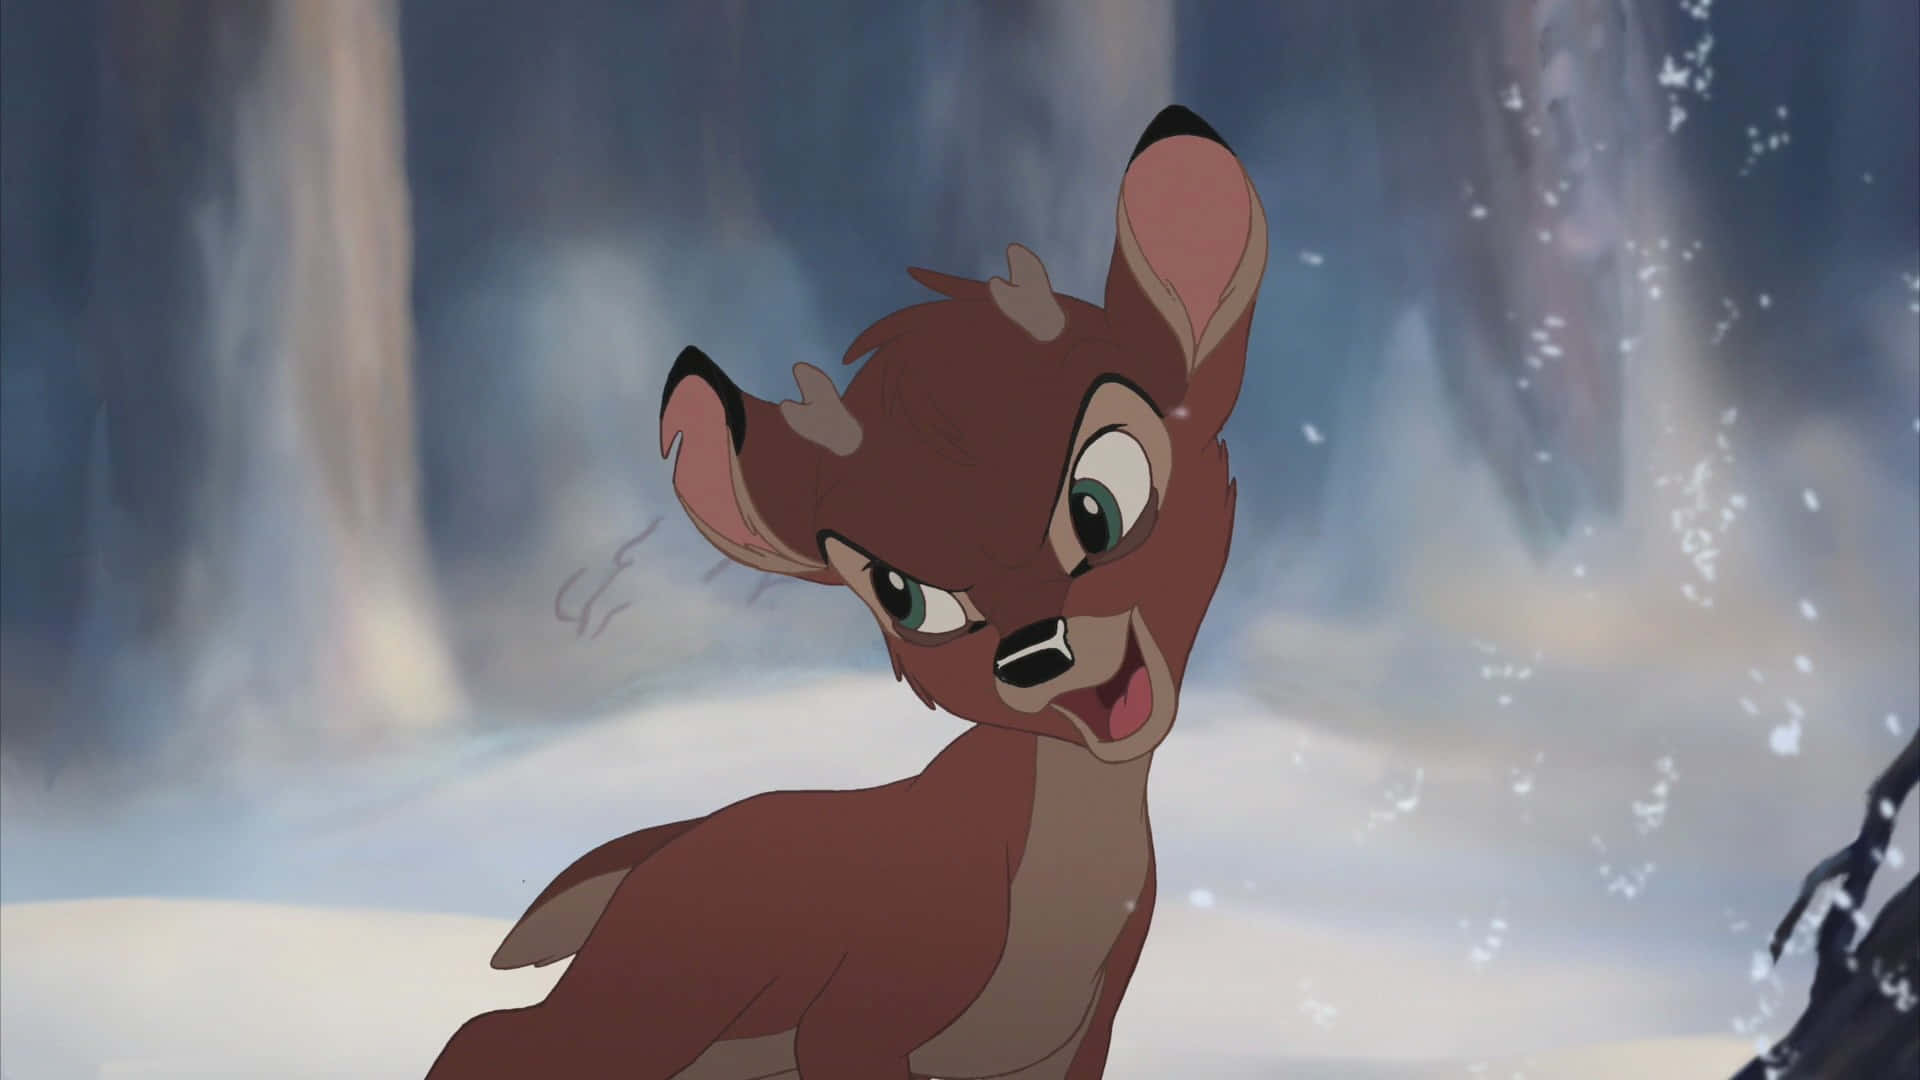 Bambi, A Disney Classic that Has Captured Hearts for Generations